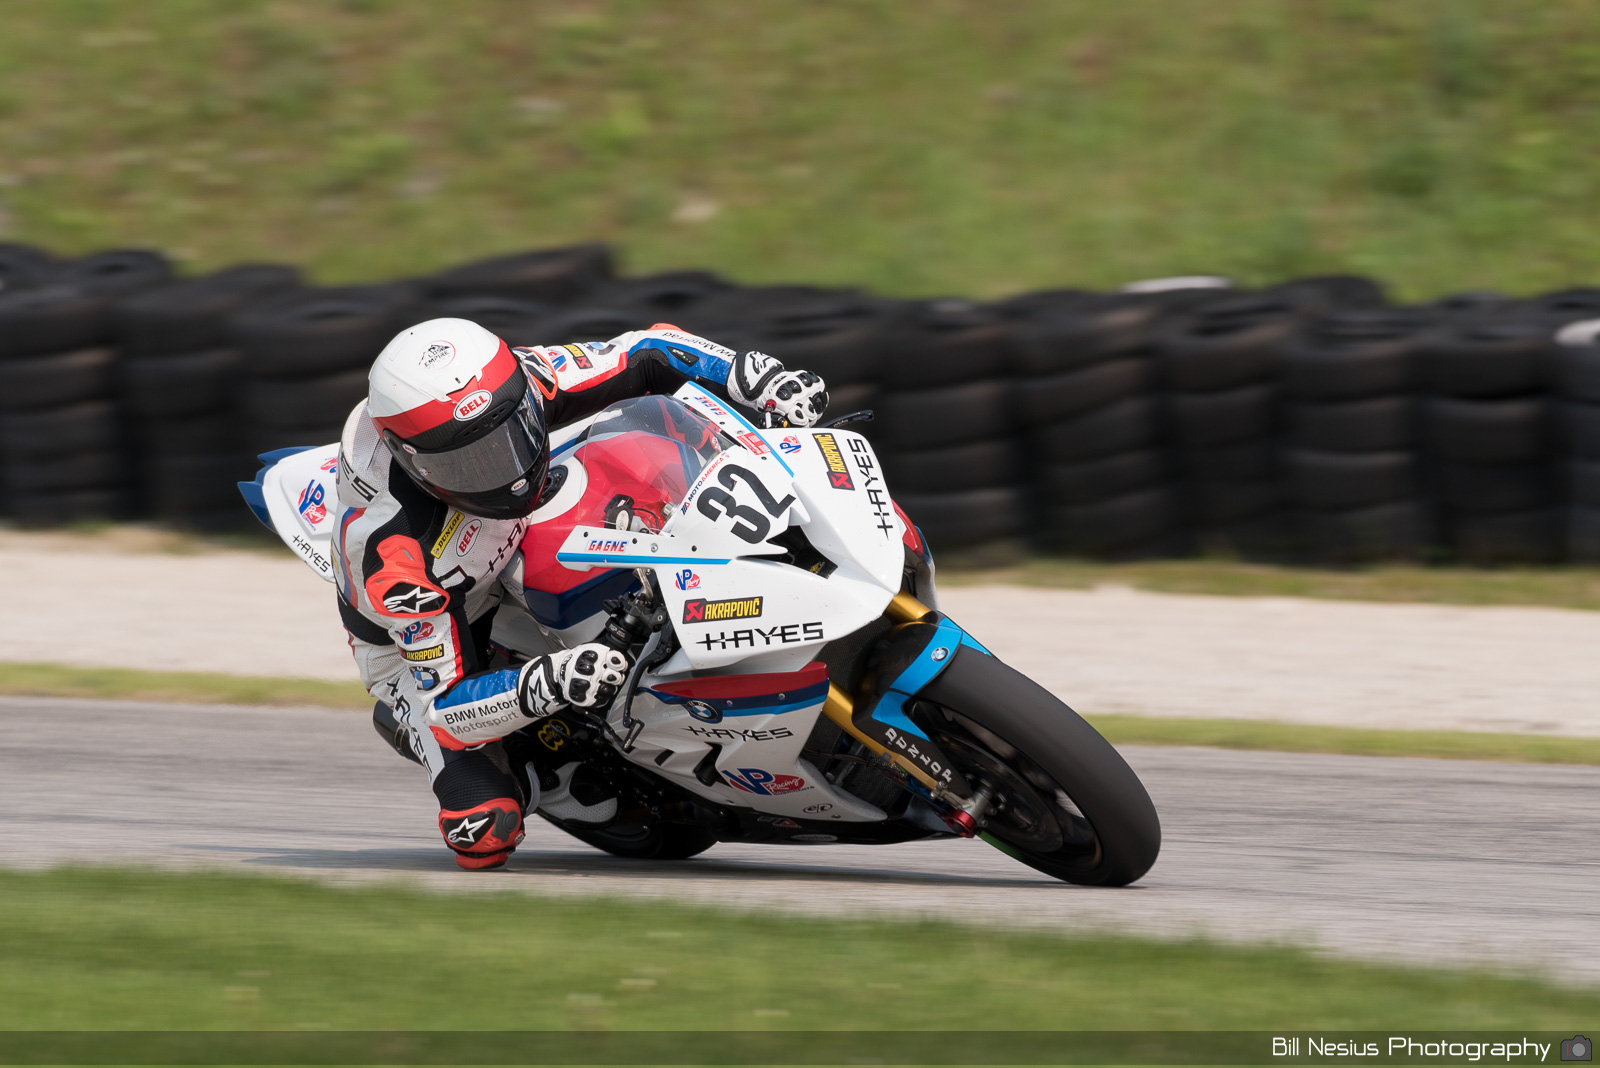 Jake Gagne on the Number 32 Scheibe Racing BMW S100RR3 / DSC_8341 / 4